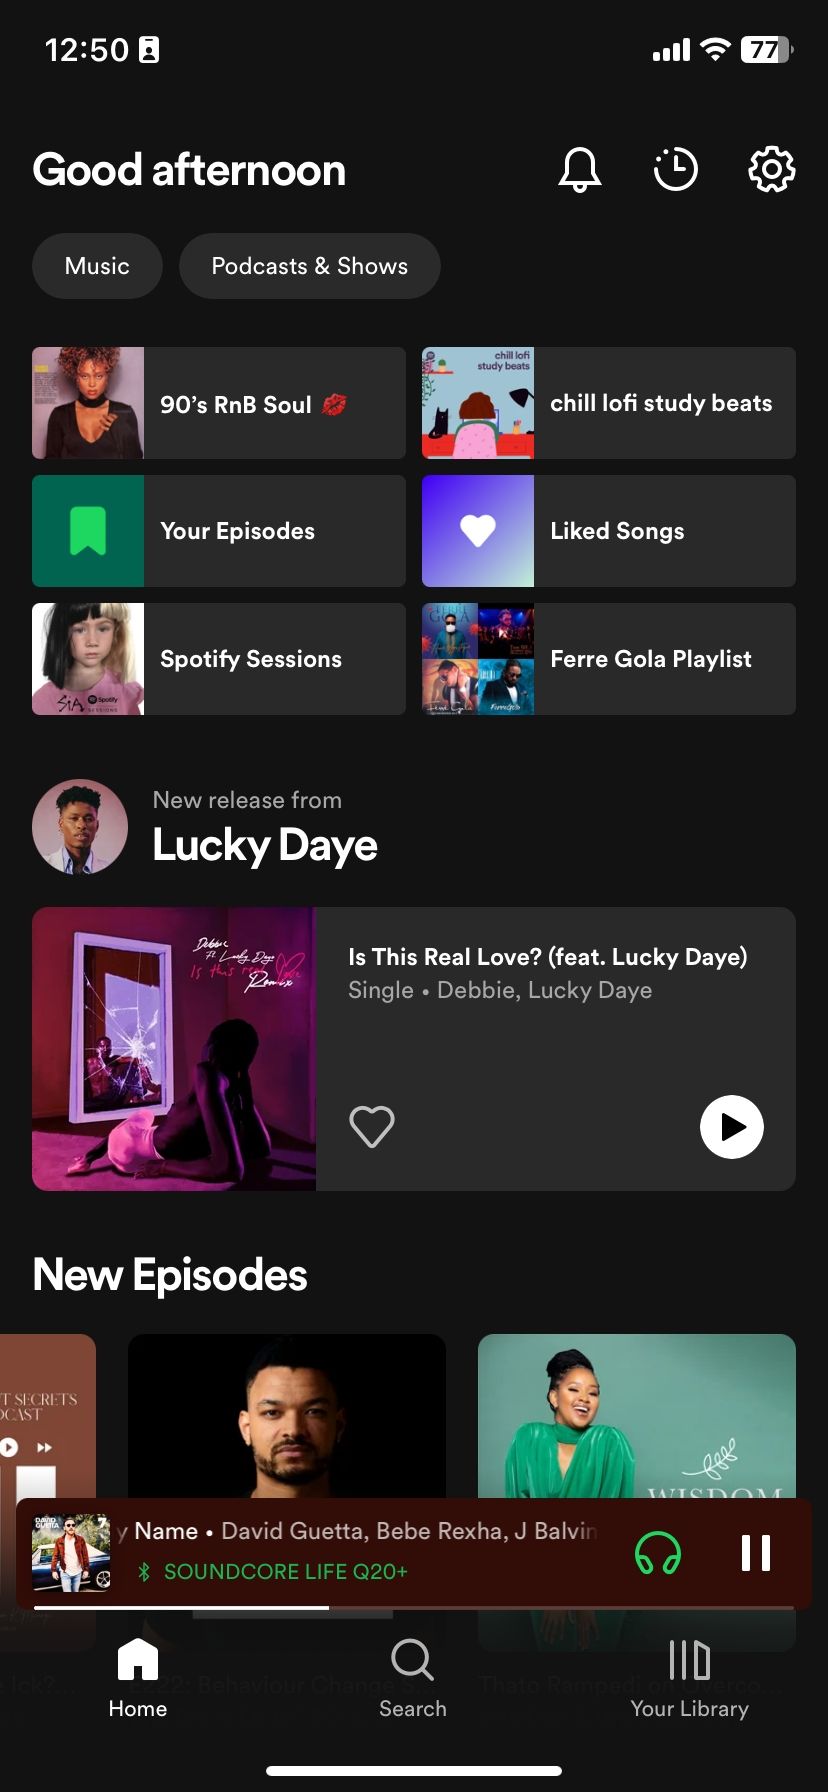 Spotify's home tab interface on iOS